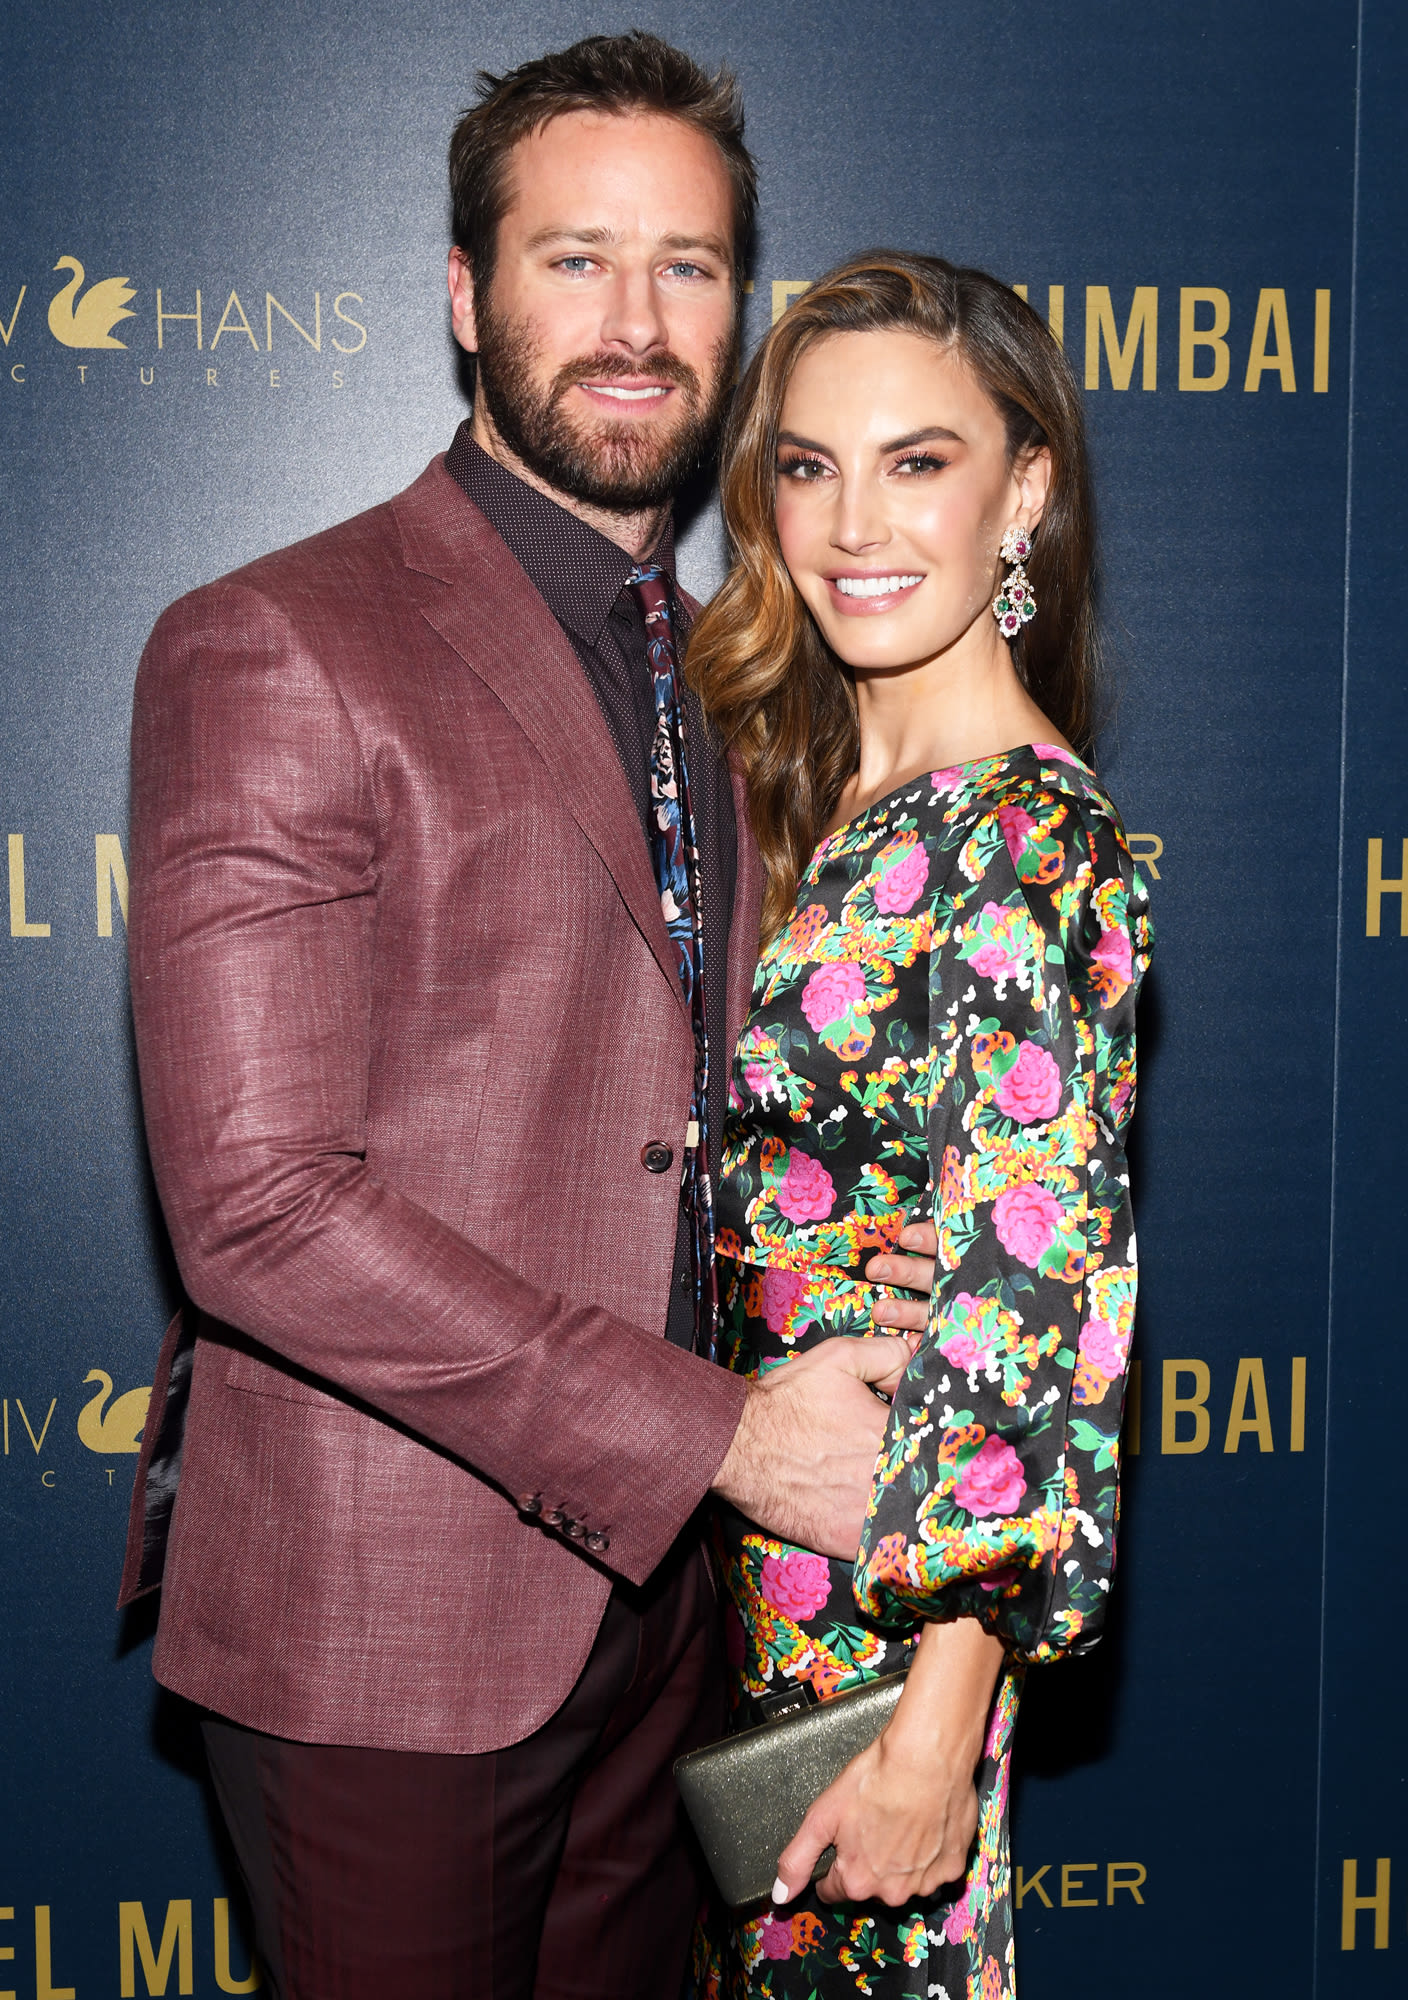 Armie Hammer Says He and Ex-Wife Elizabeth Chambers Are ‘Very Good Coparents’ After Split